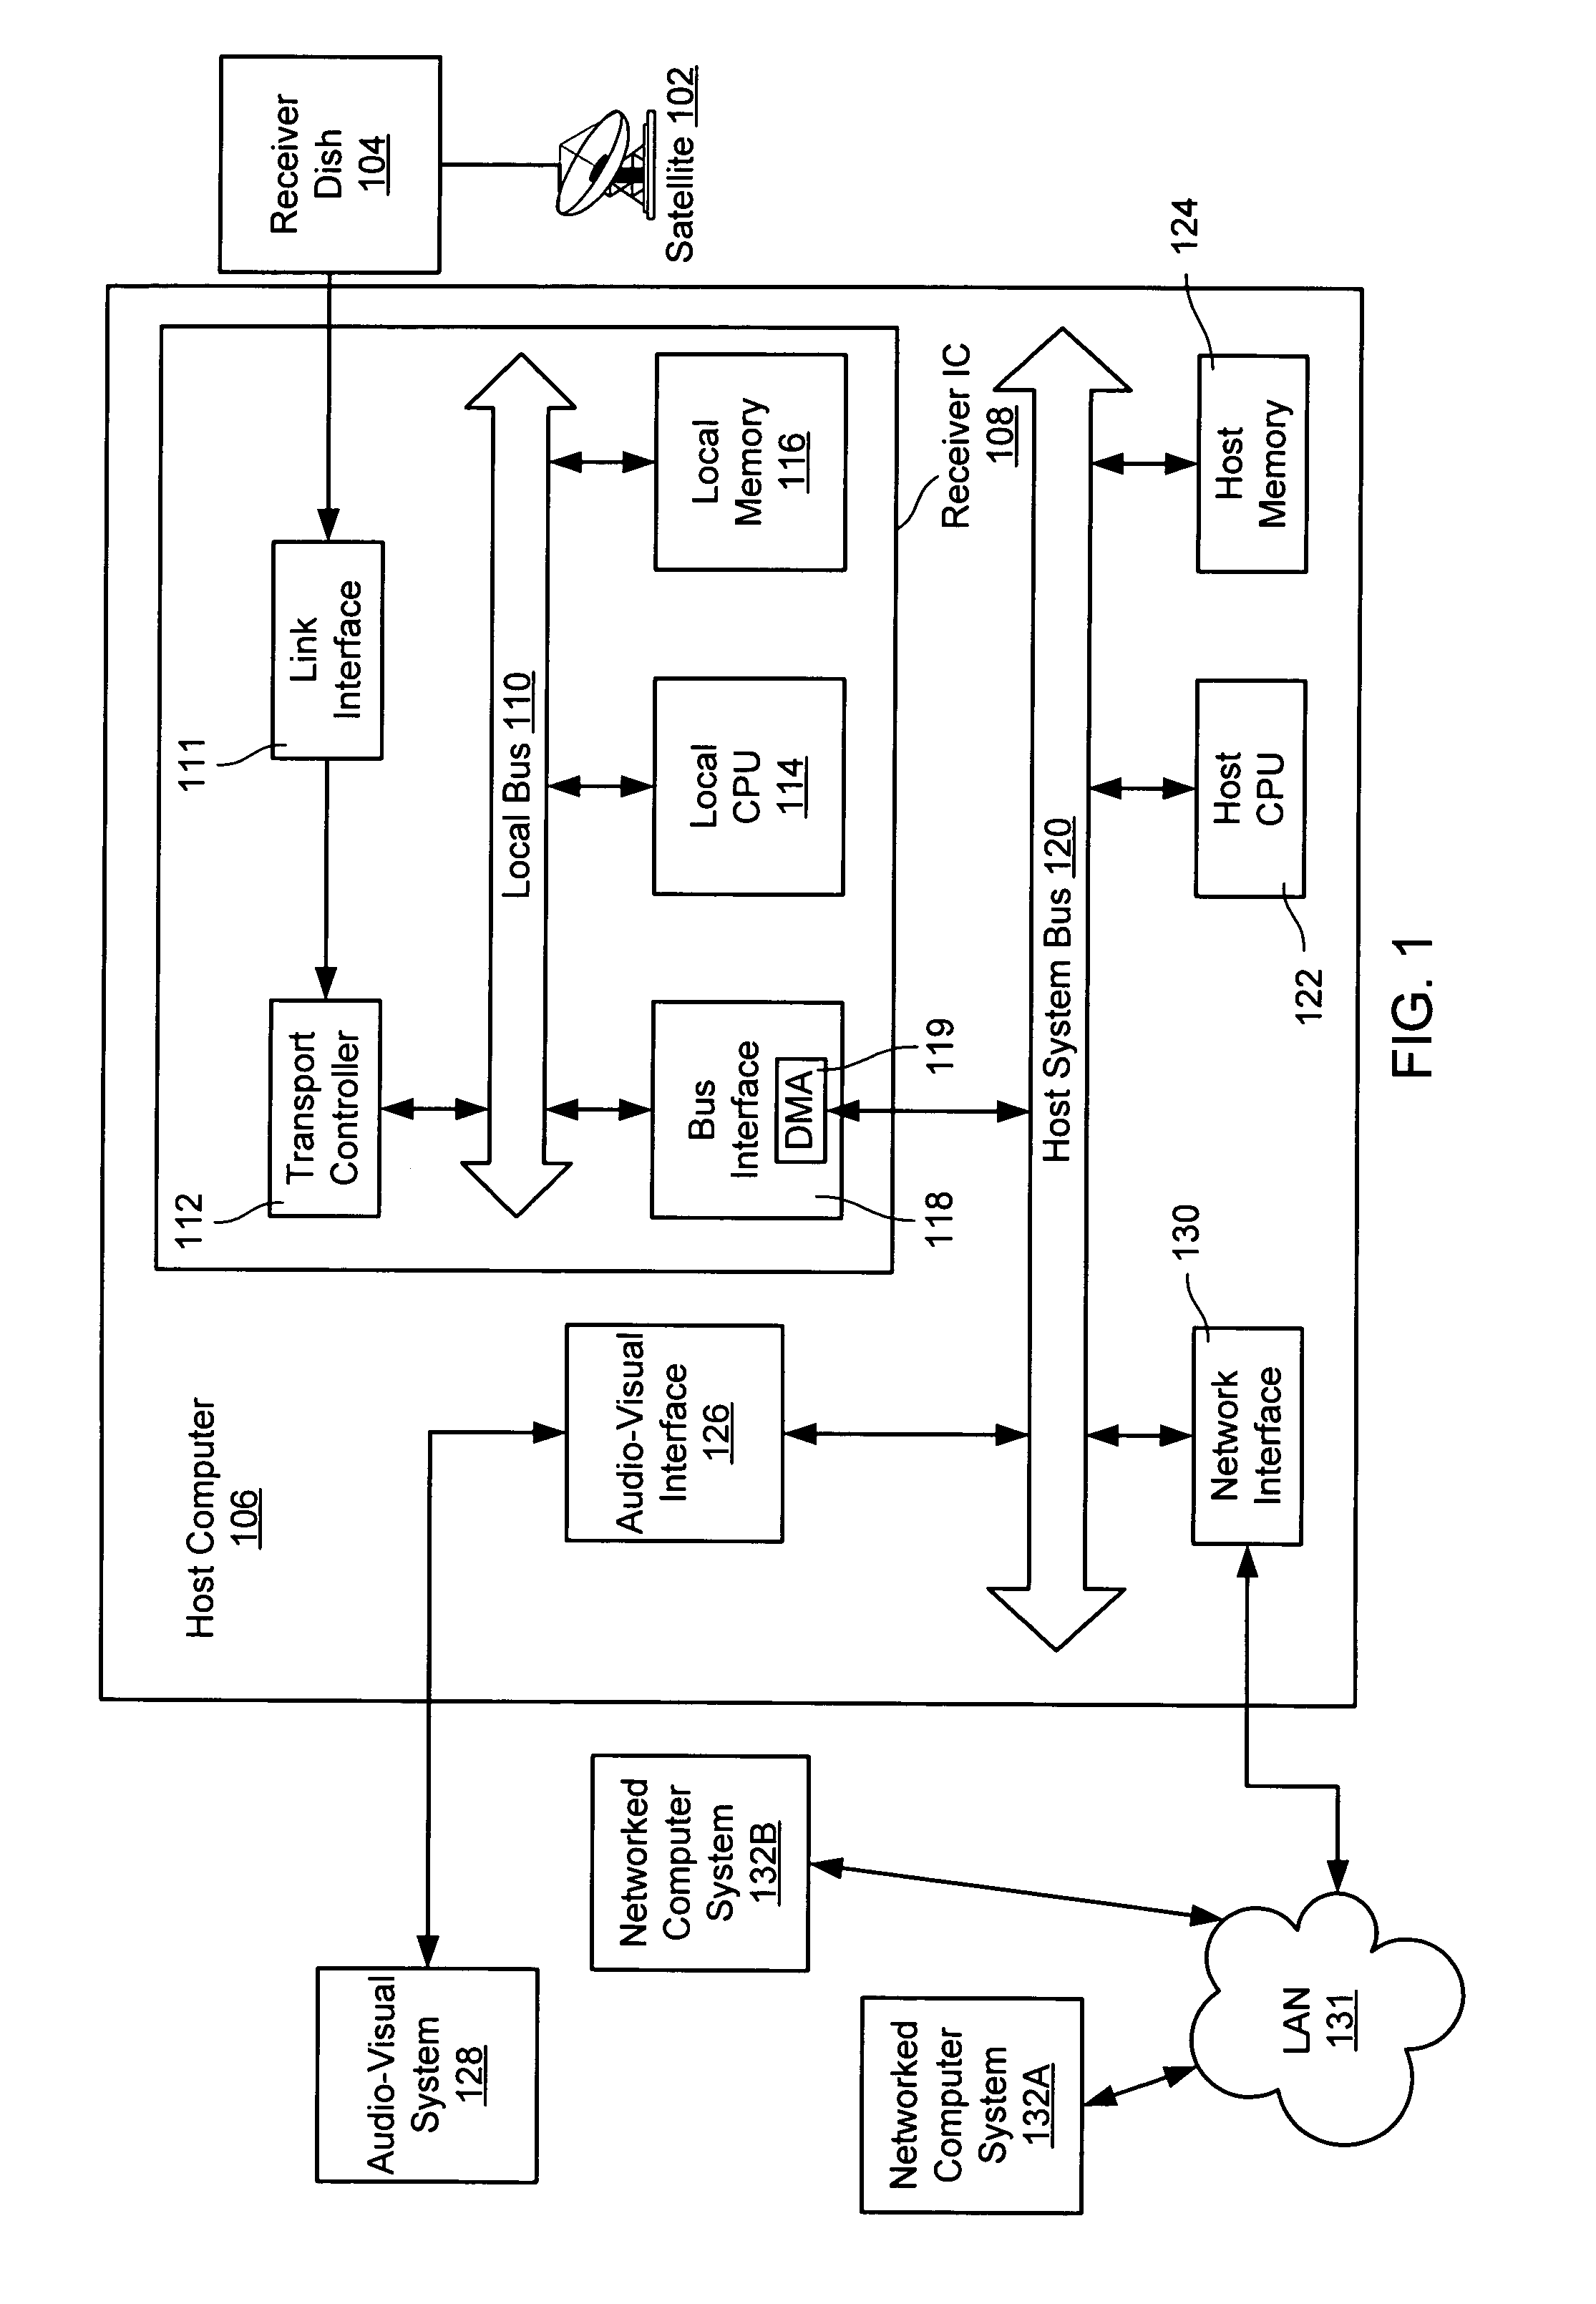 System time clock capture for computer satellite receiver